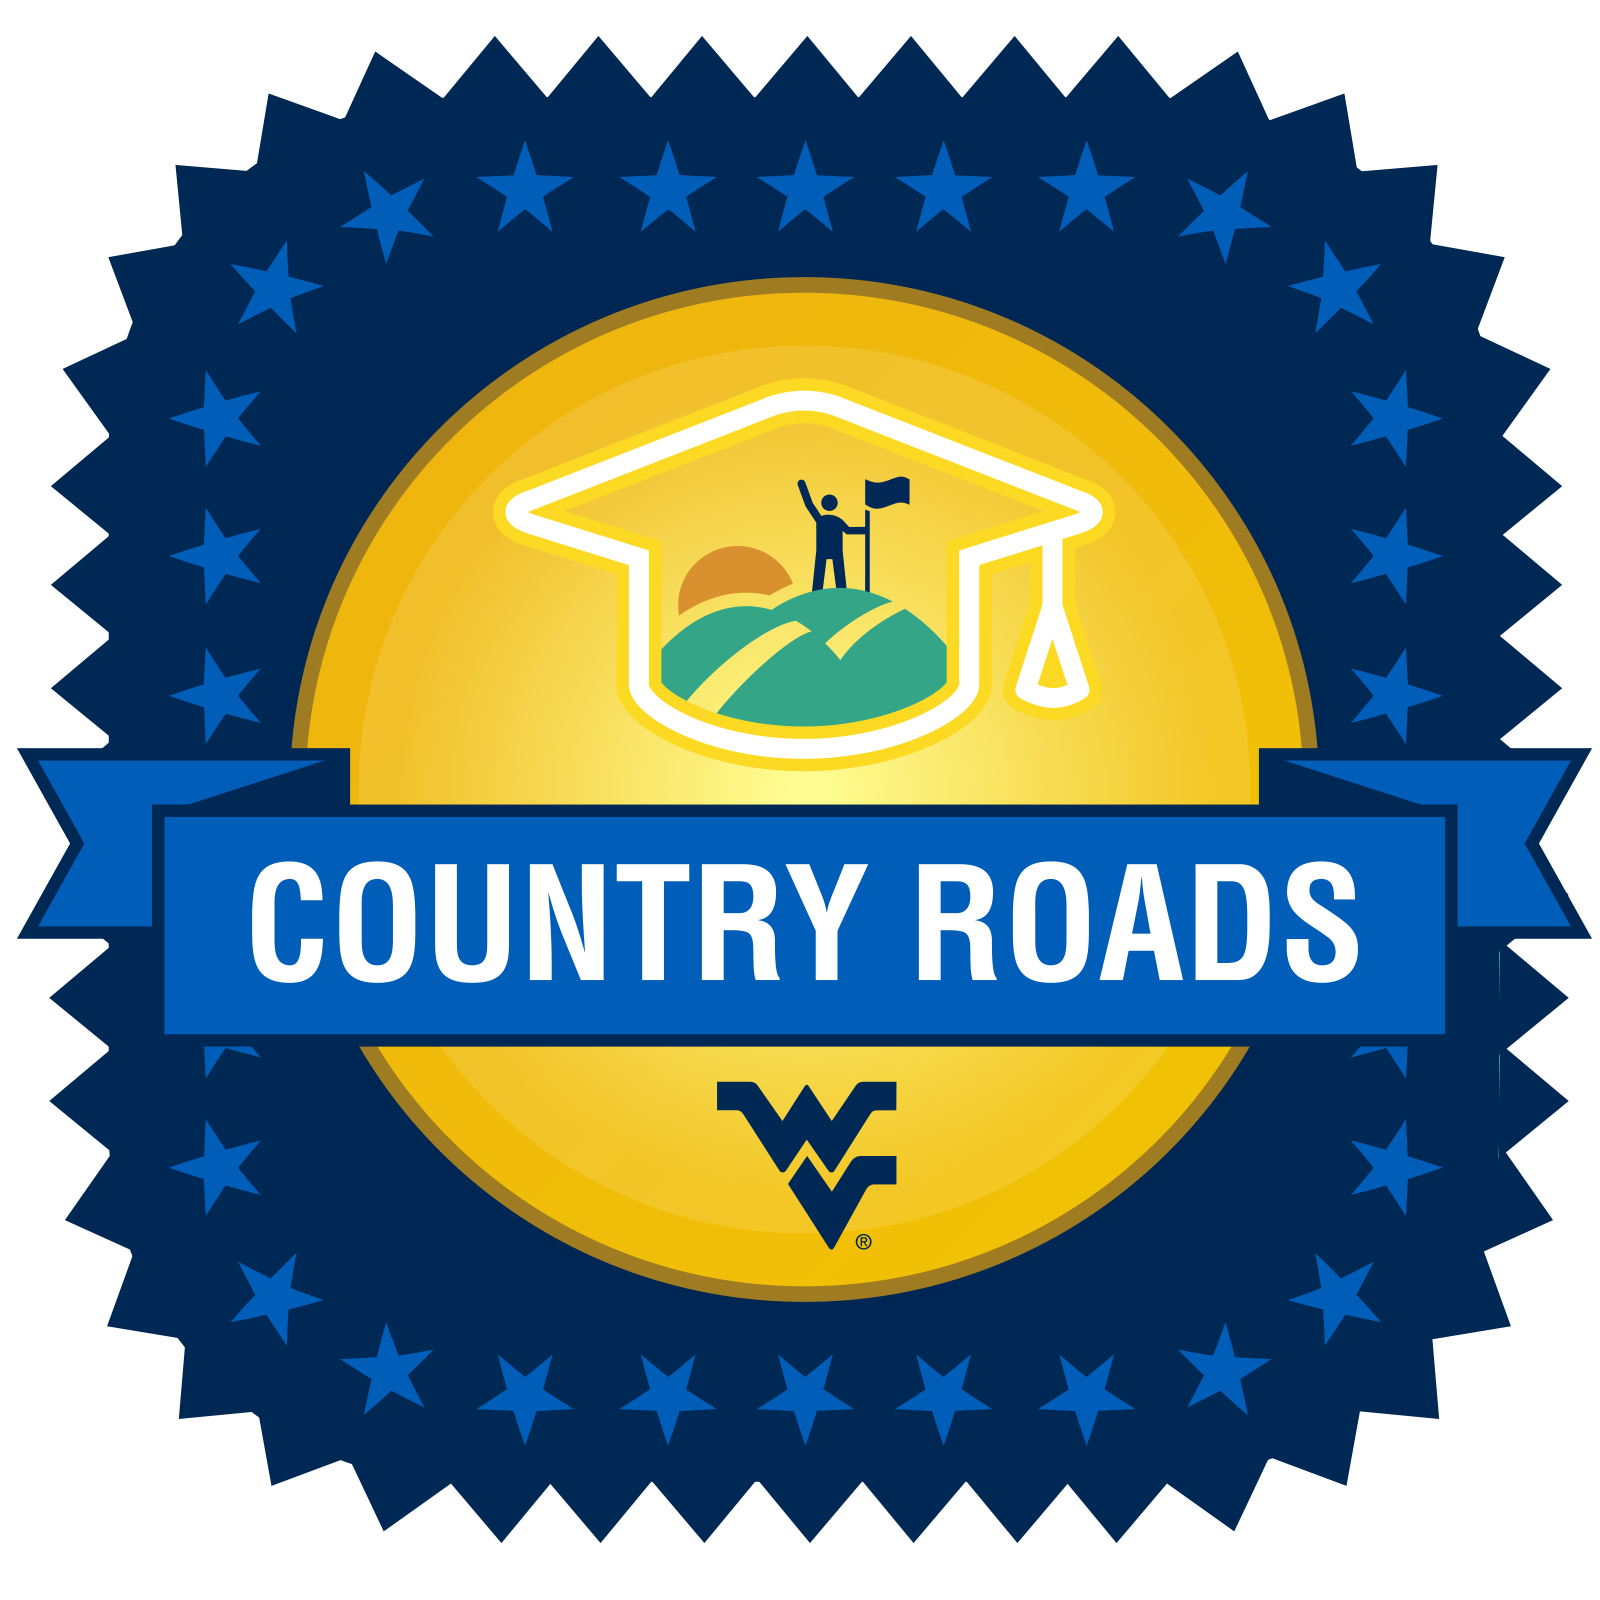 Country Roads badge